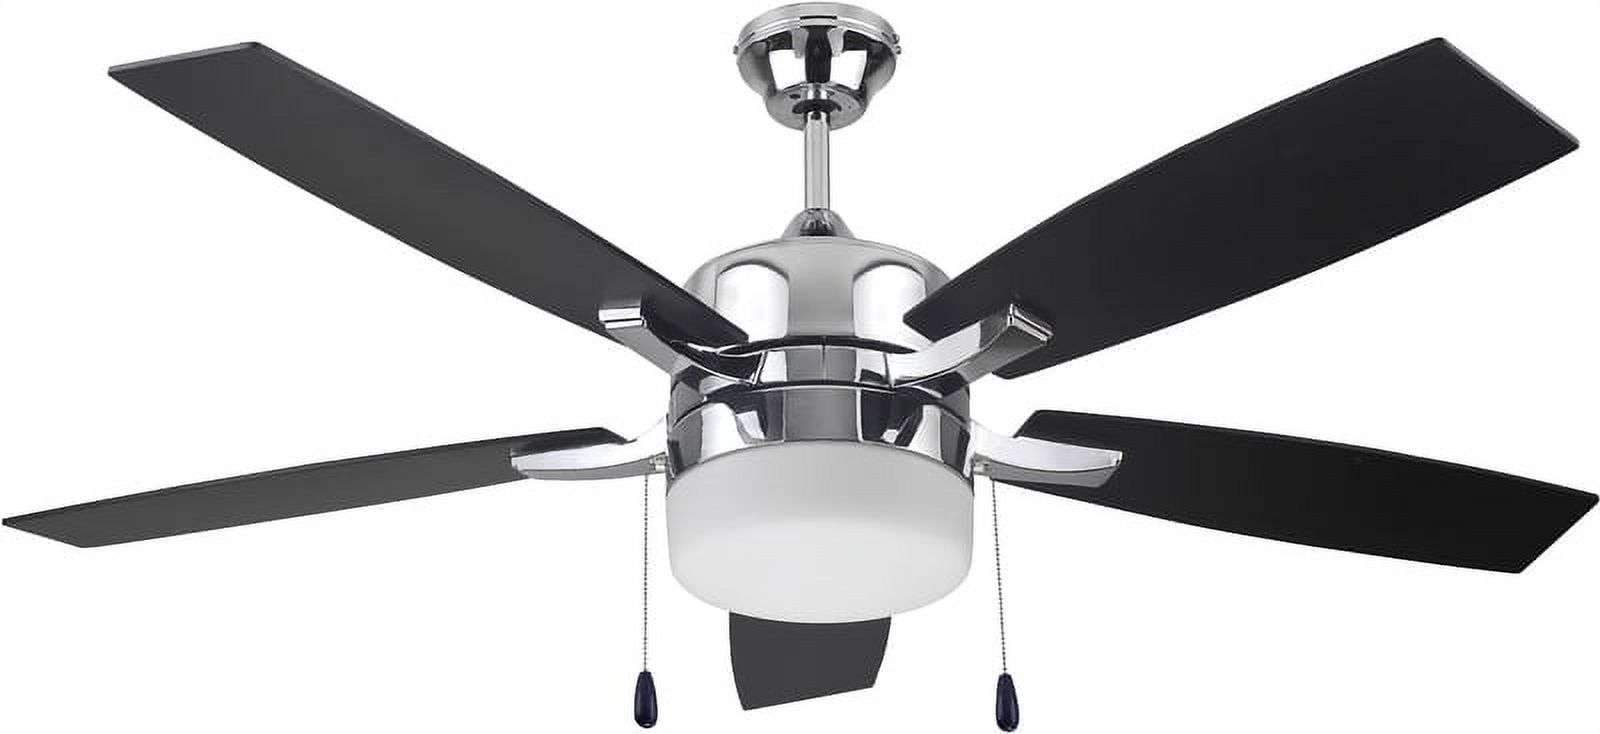 Hardware House Breckenridge 52," 5 Blade, Triple Mount Ceiling Fan 25-1945 with Chrome Finish - image 1 of 2